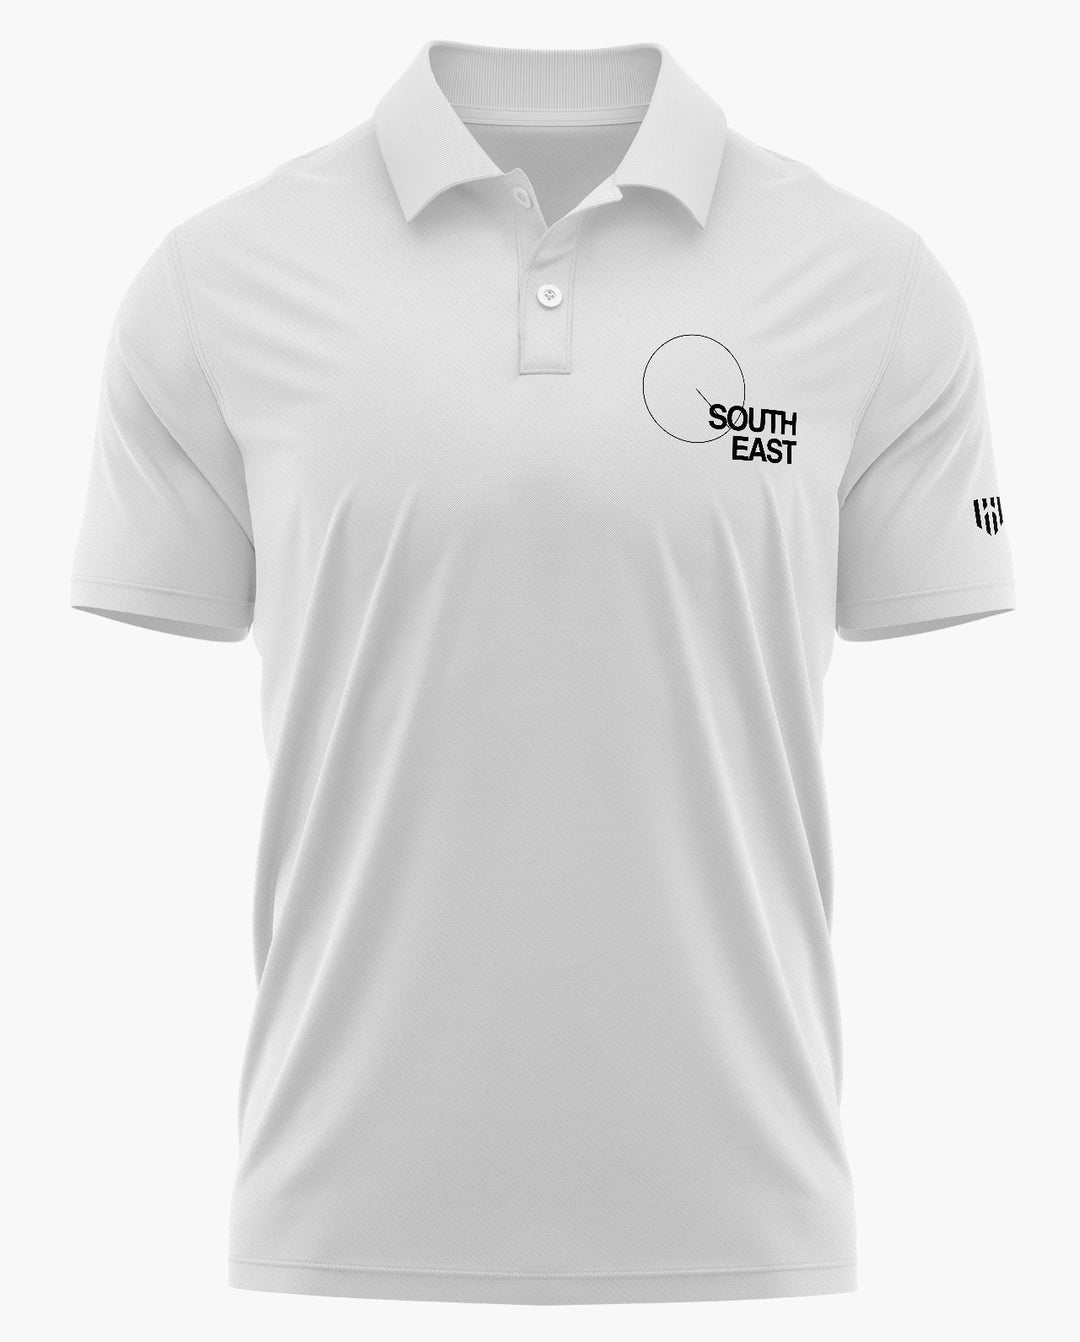 Direction South East Polo T-Shirt